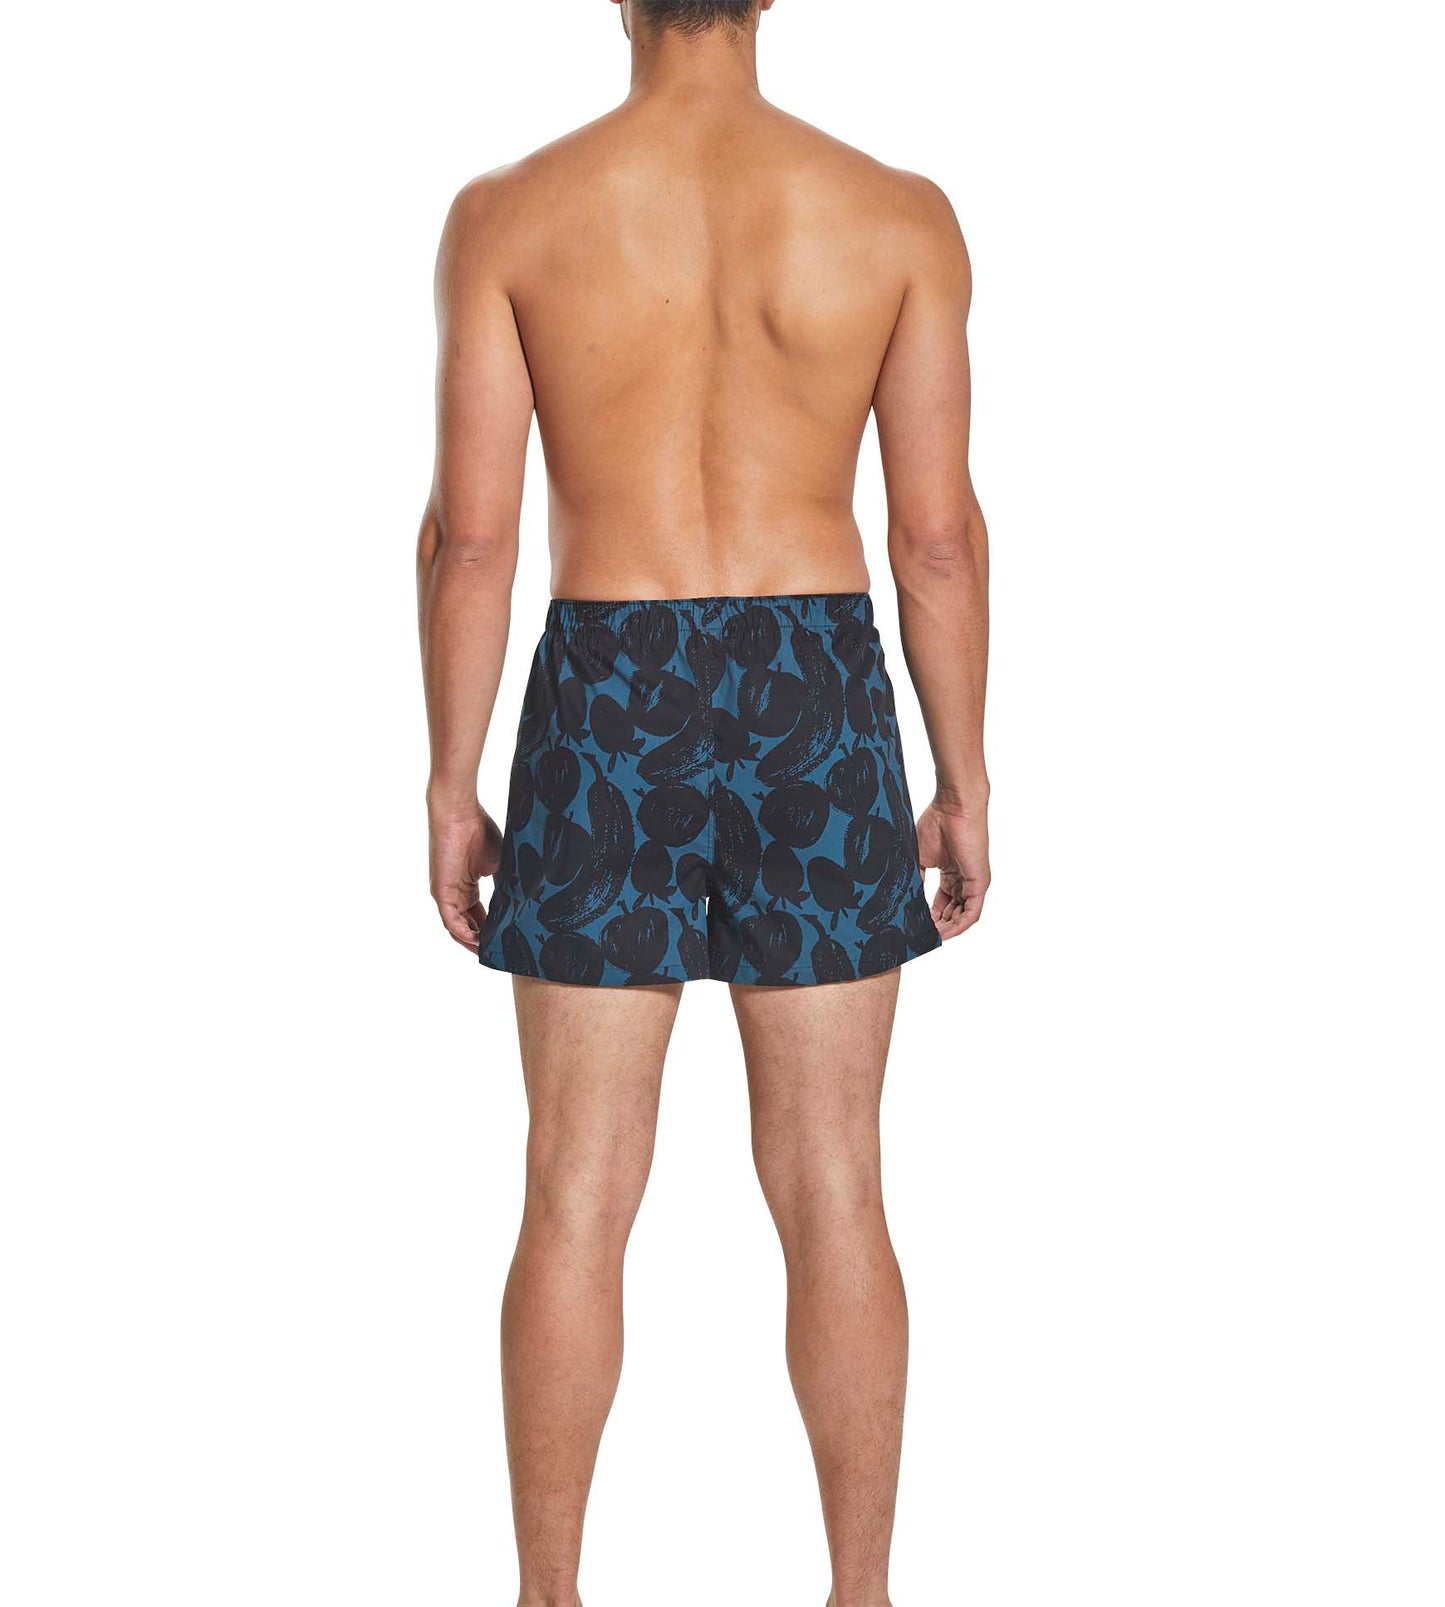 Pair Of Thieves WOVEN Boxers Small, L, & XL 100% Cotton The most